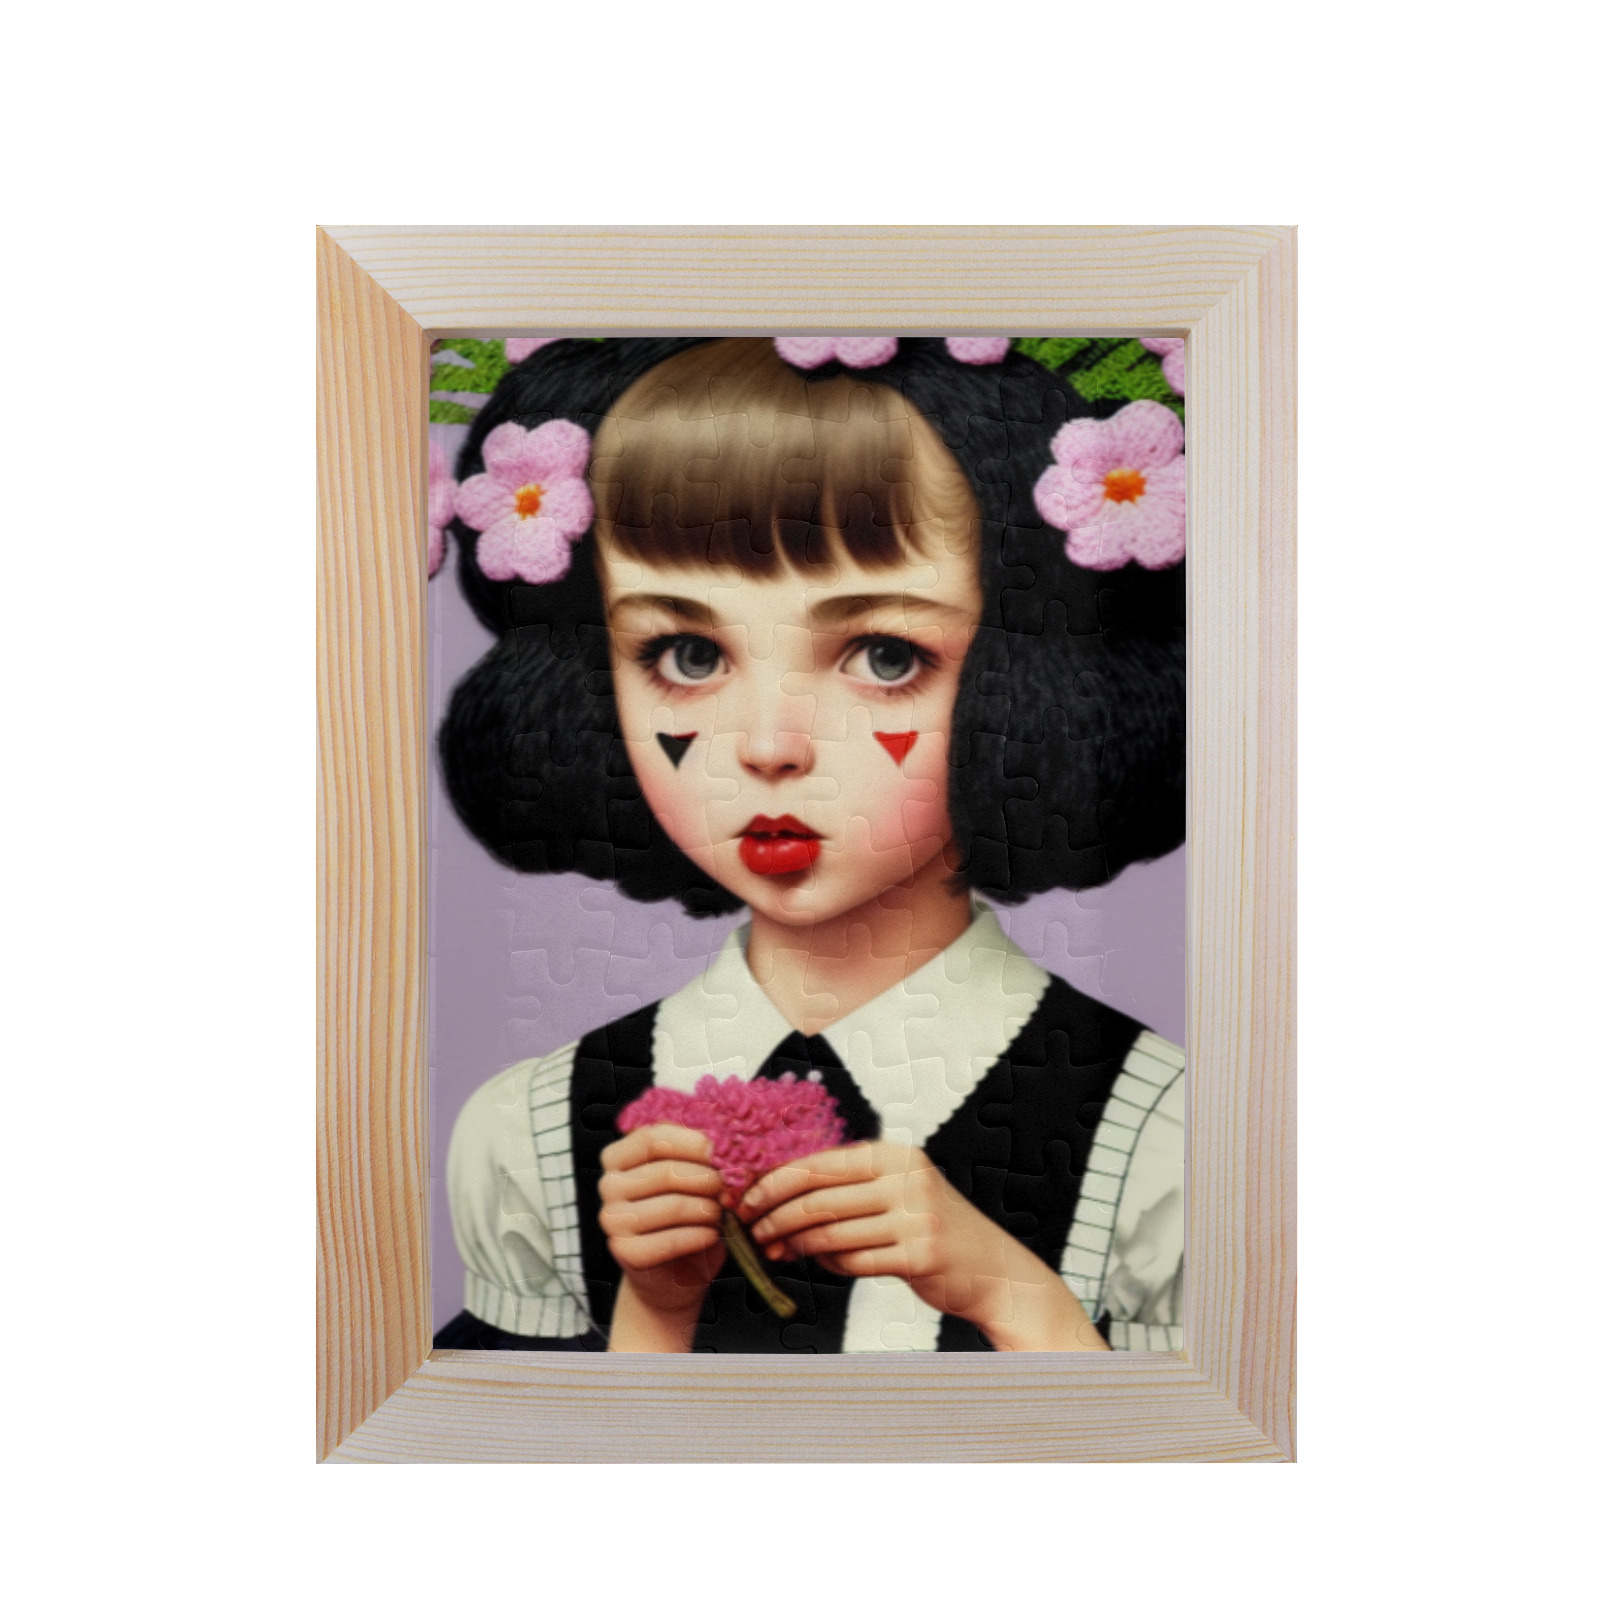 gothic girl with lipstick 64 80-Piece Puzzle Frame 7"x 9"